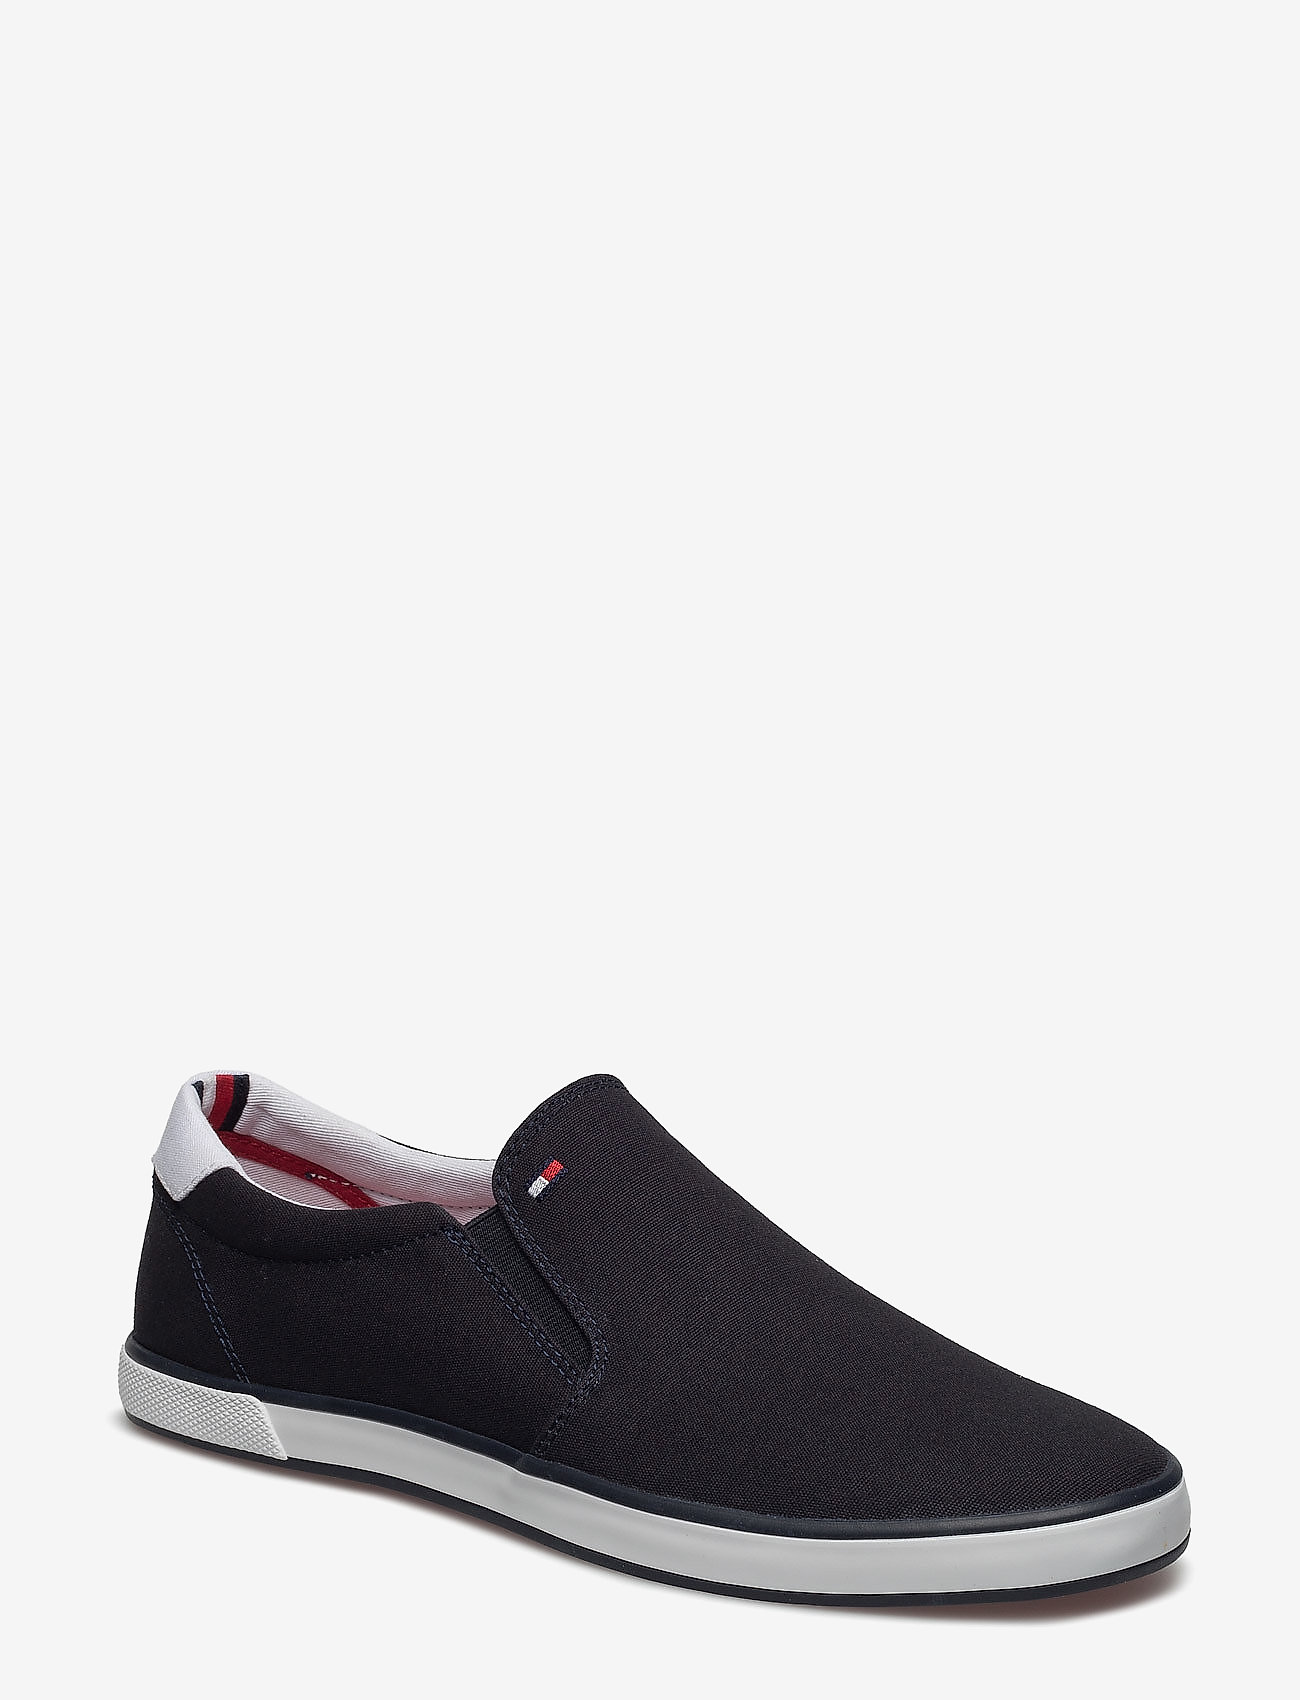 Tommy Hilfiger - ICONIC SLIP ON SNEAKER - slip-on sneakers - midnight - 0